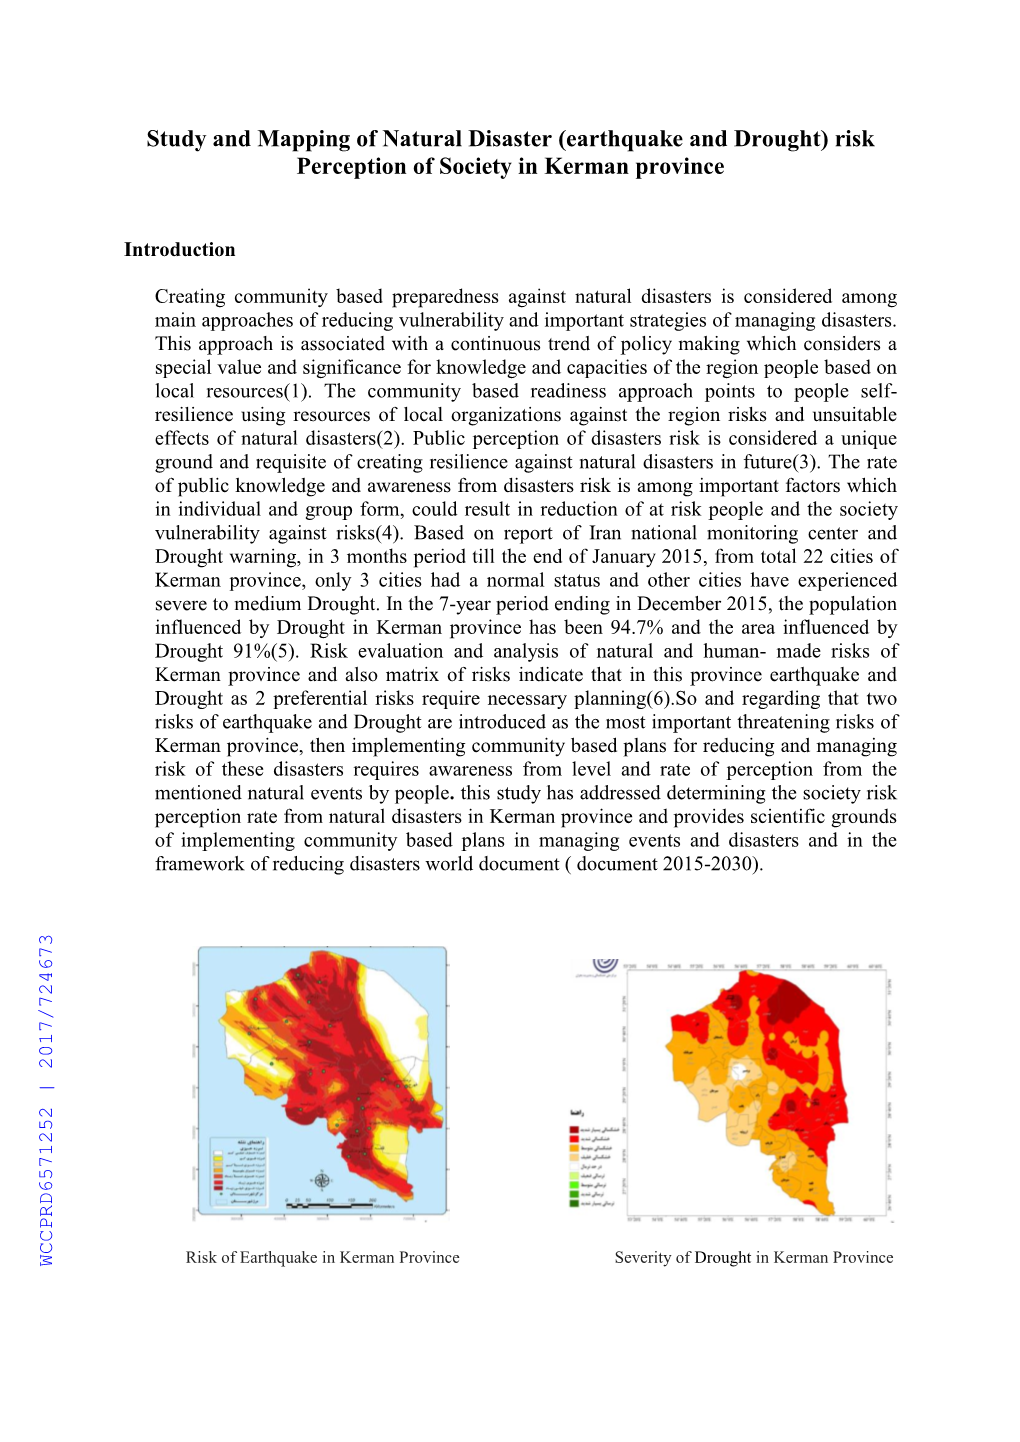 Earthquake and Drought) Risk Perception of Society in Kerman Province